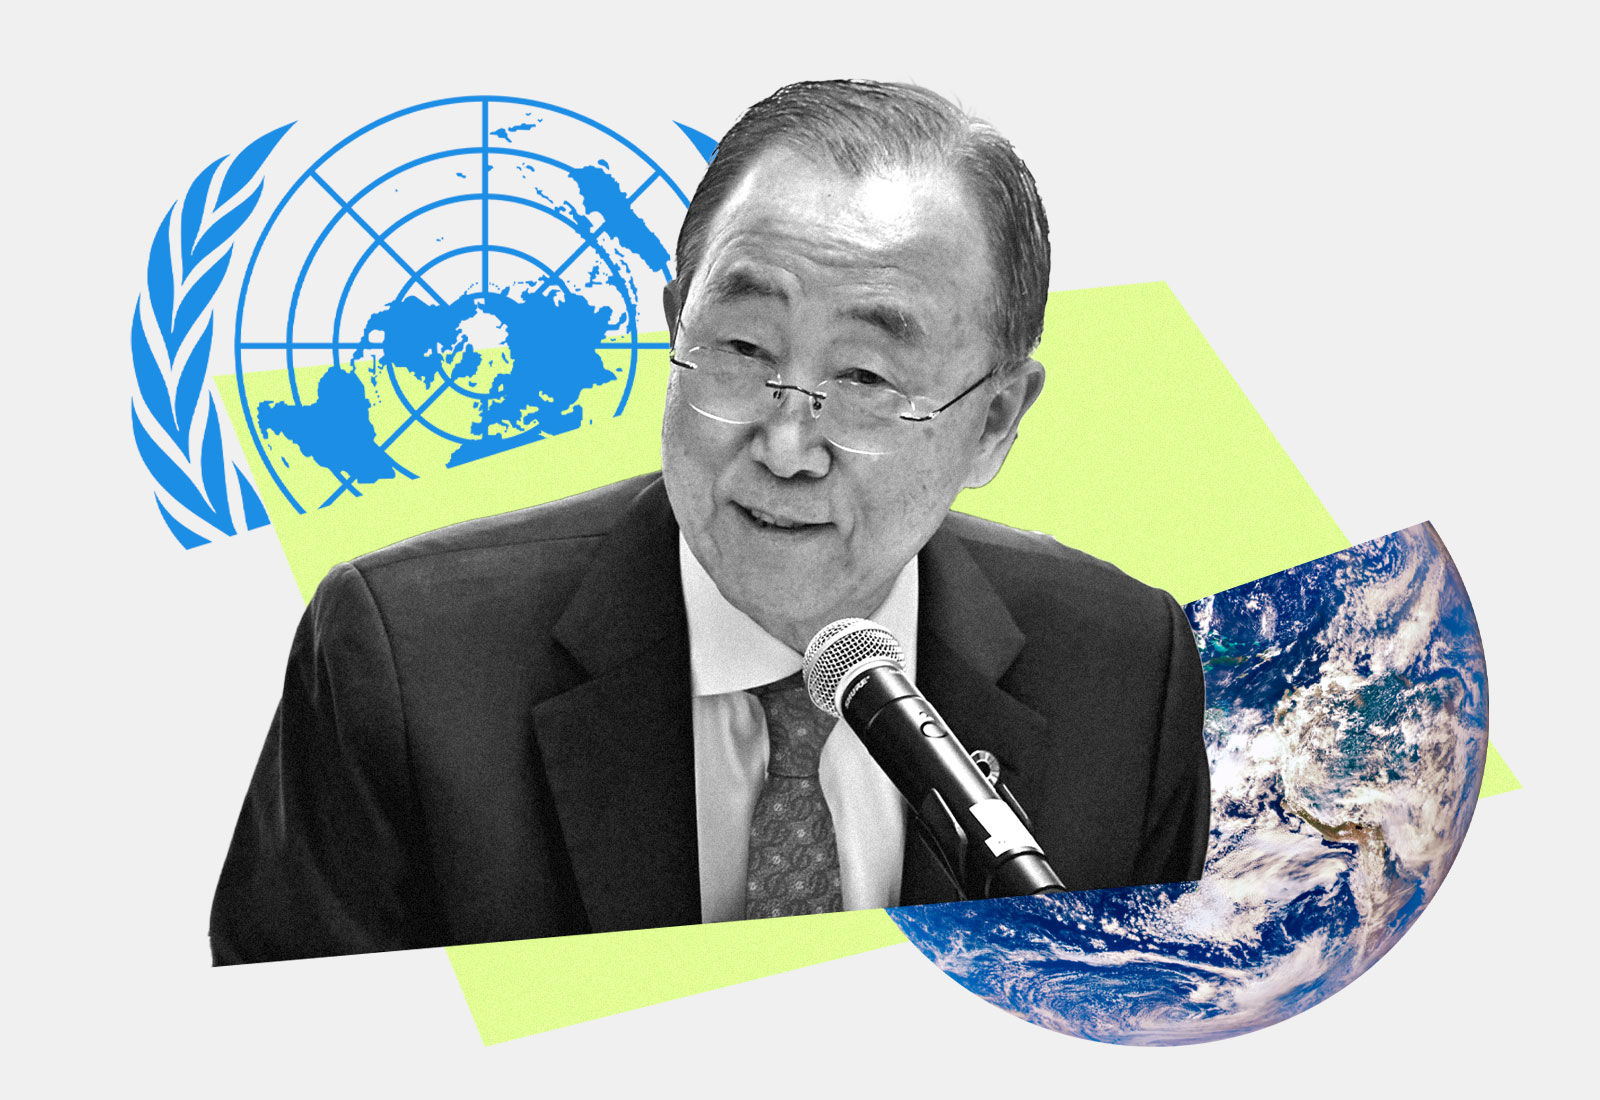 Collage: Ban Ki-Moon with the United Nations logo and planet Earth behind him